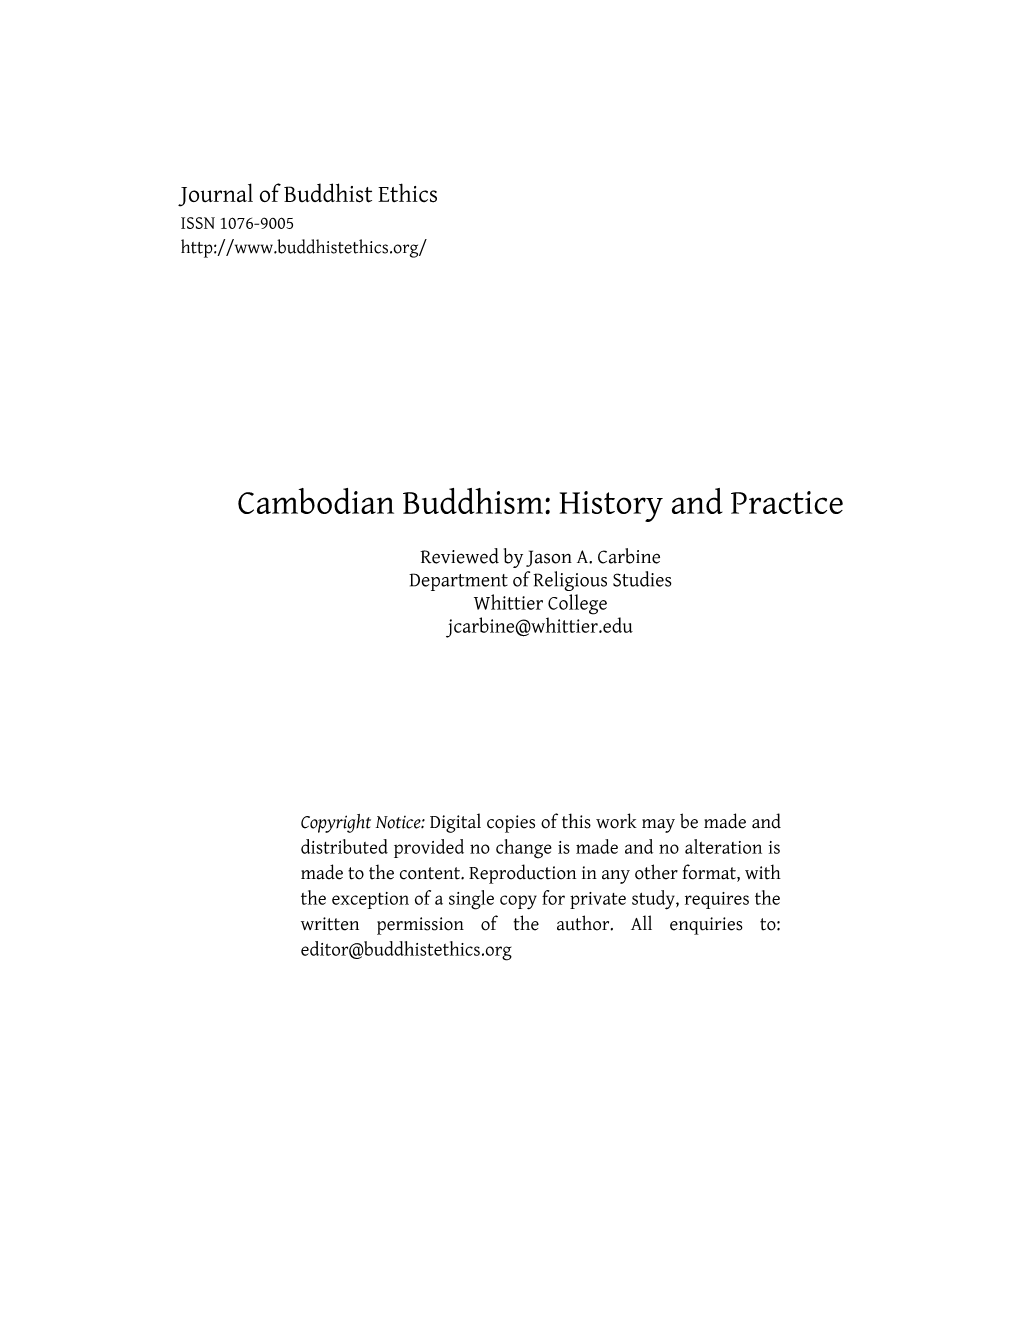 Cambodian Buddhism: History and Practice